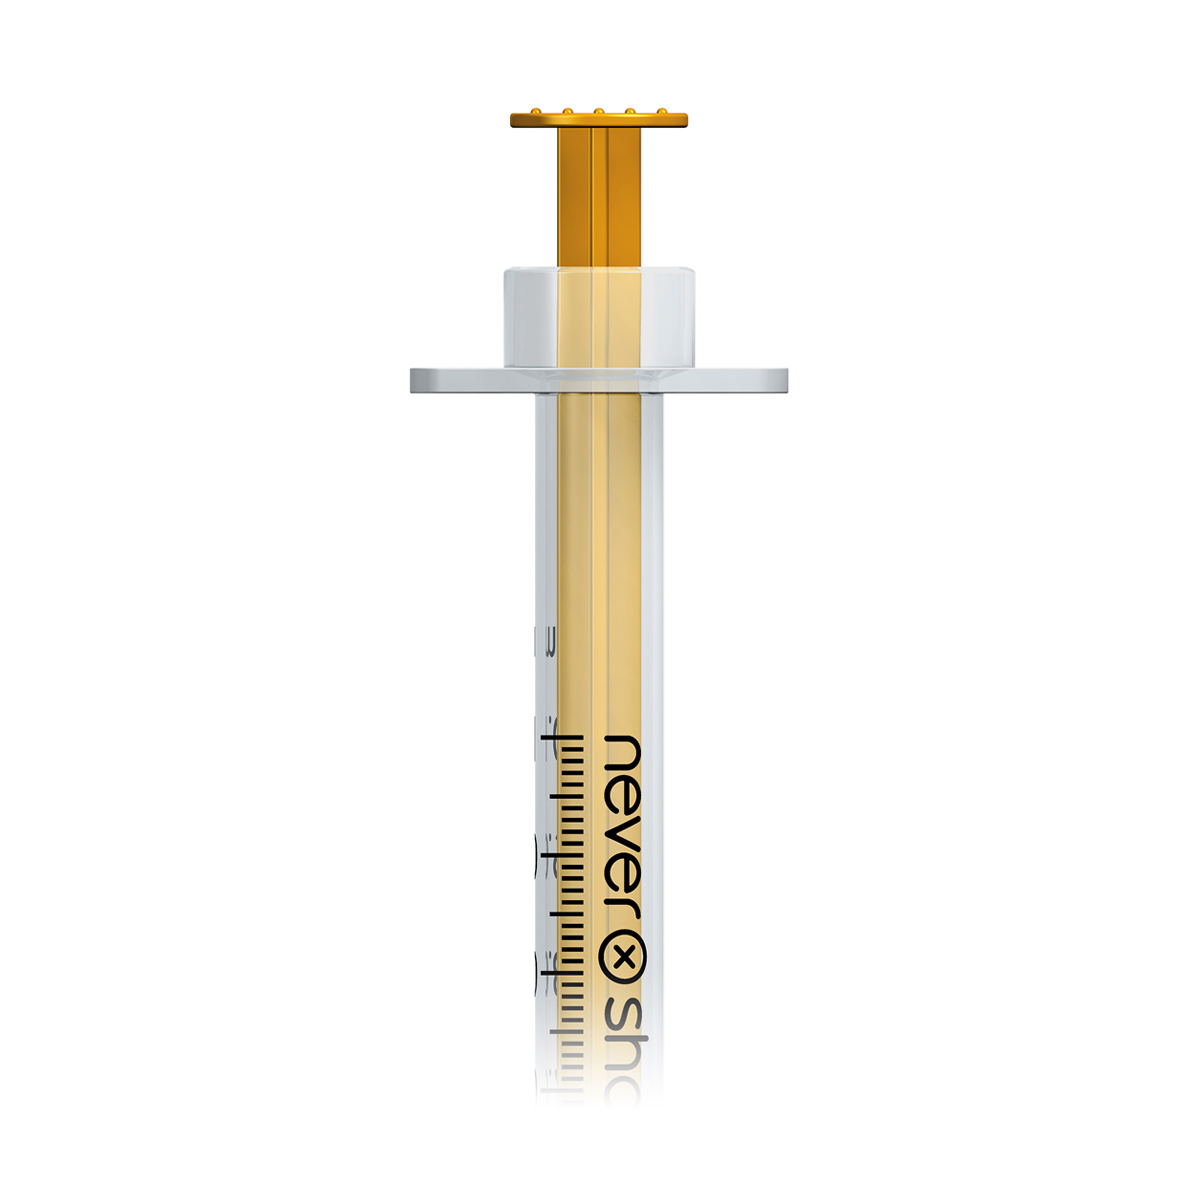 Nevershare 1ml 30G fixed needle syringe: yellow  (discontinued, see below)